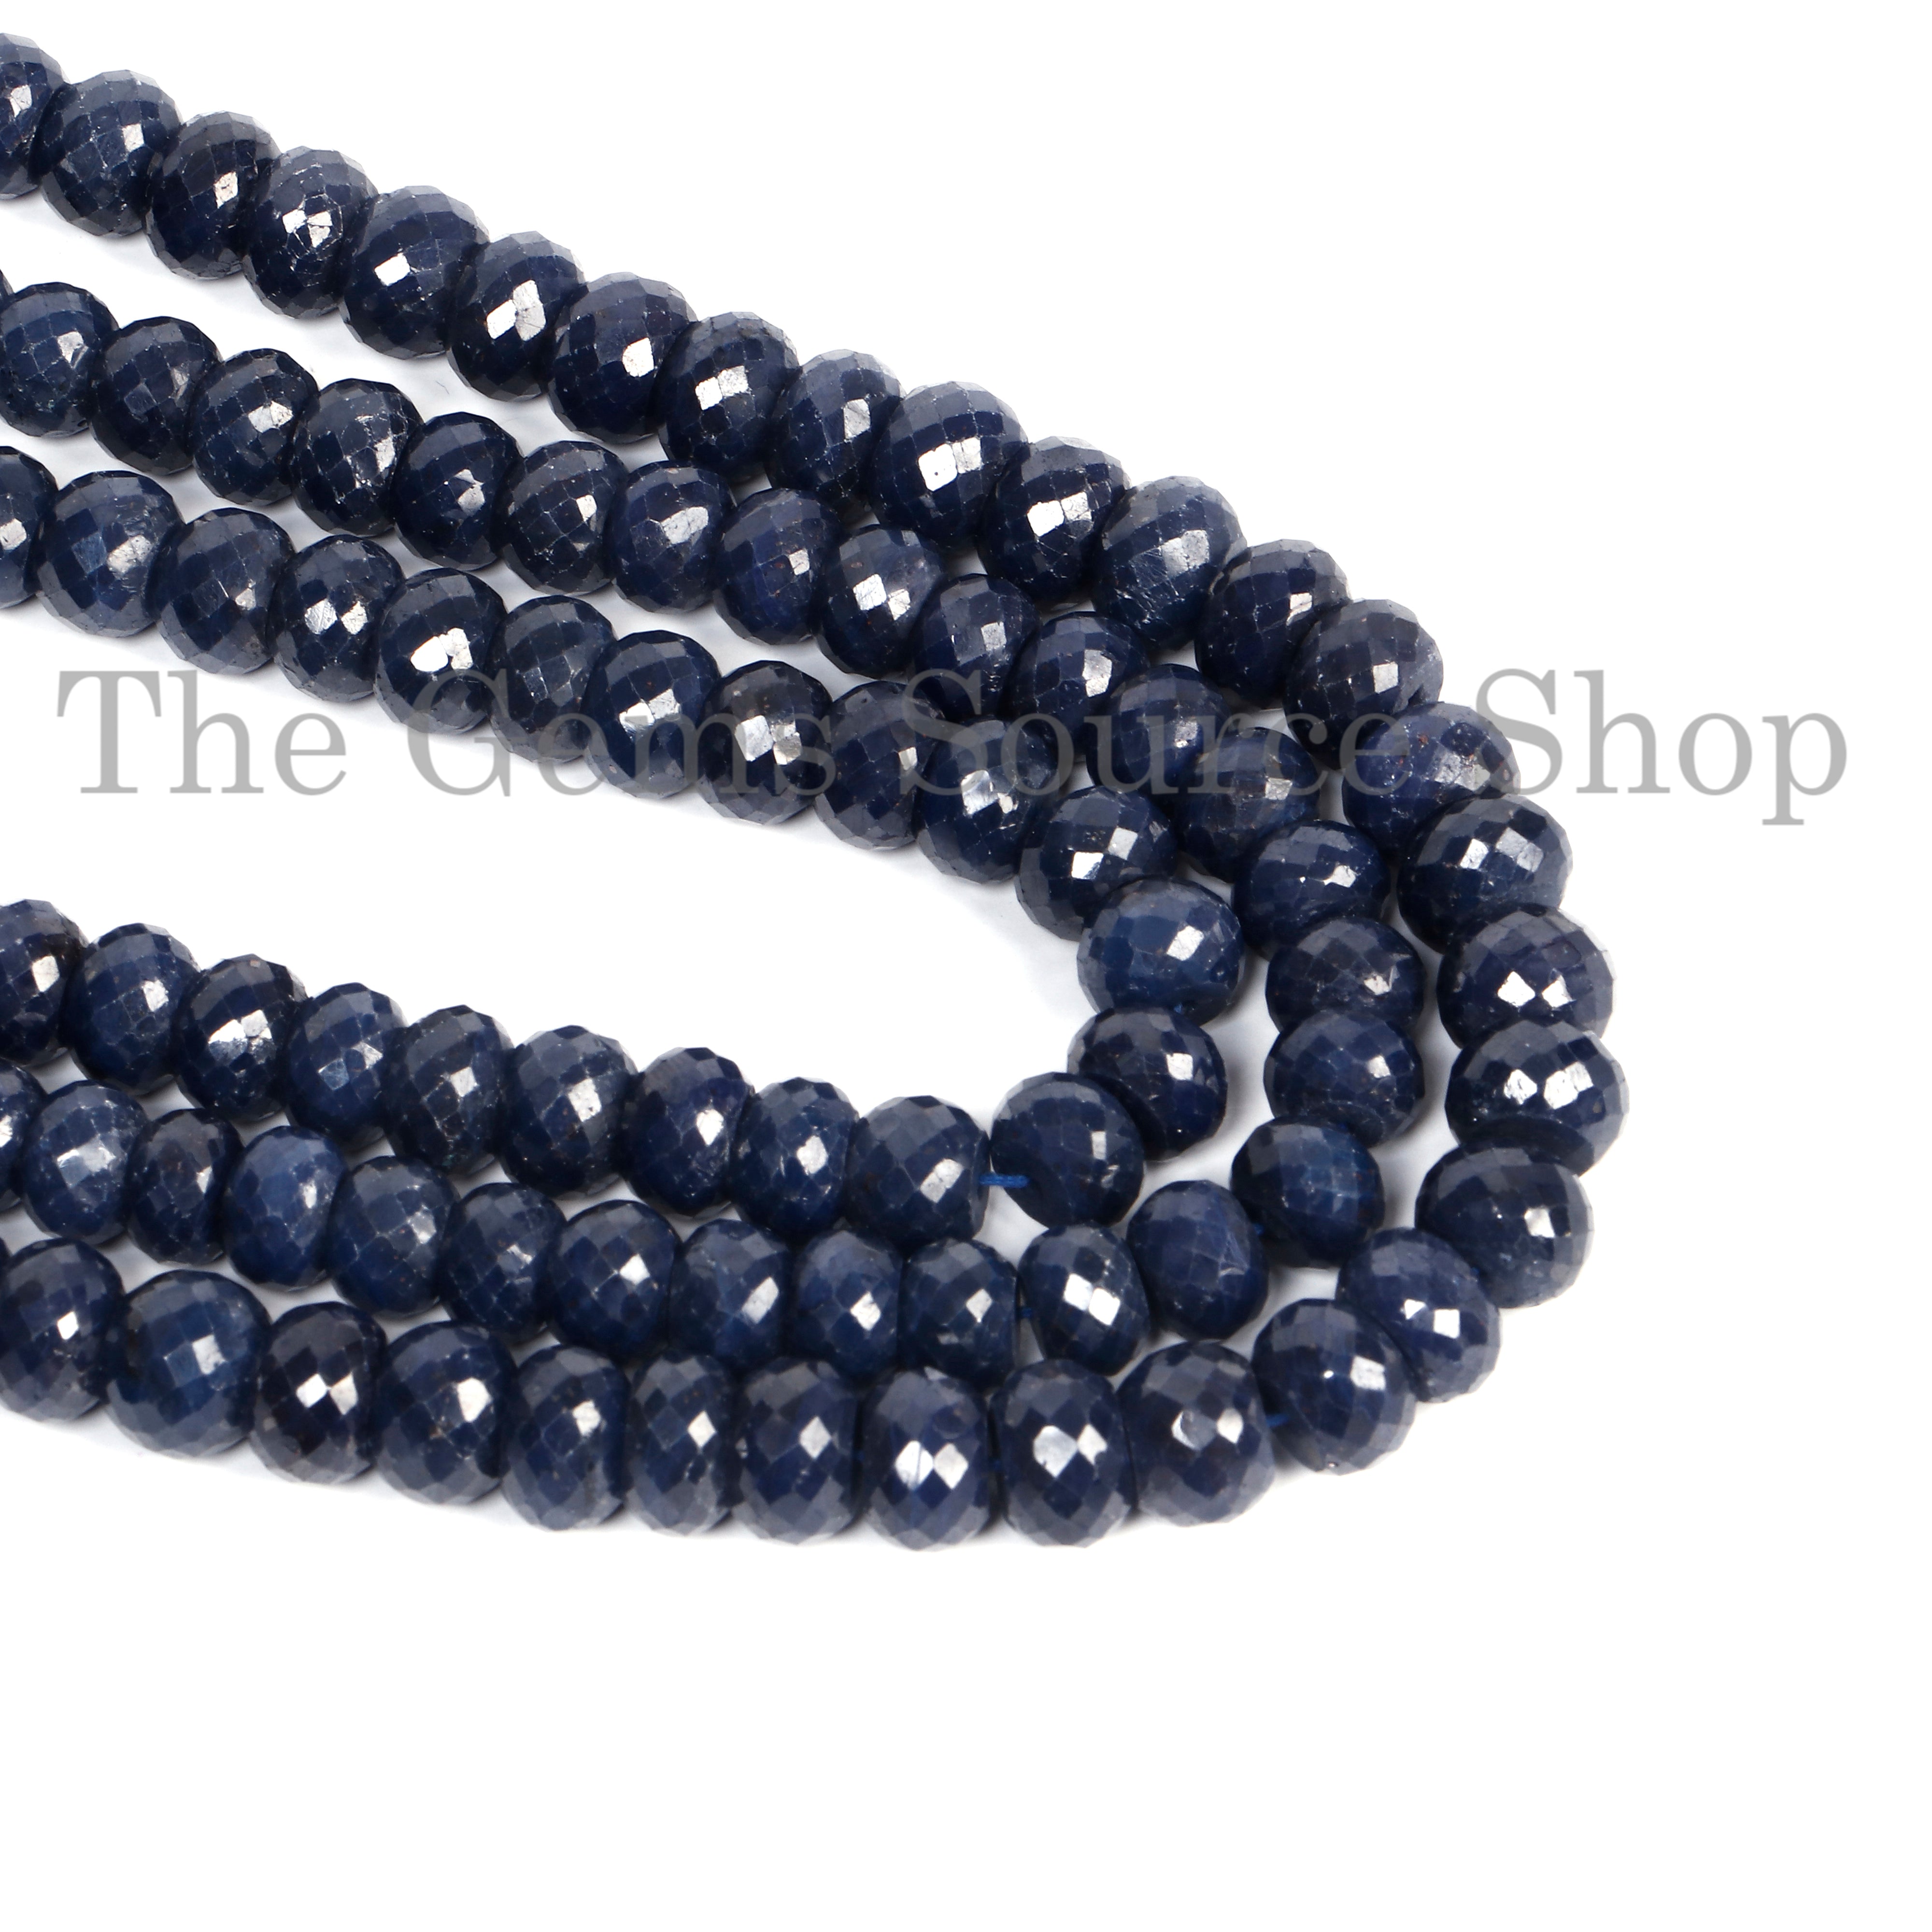 Blue Sapphire Beads, Sapphire Faceted Beads, Sapphire Rondelle Beads, Sapphire Gemstone Beads